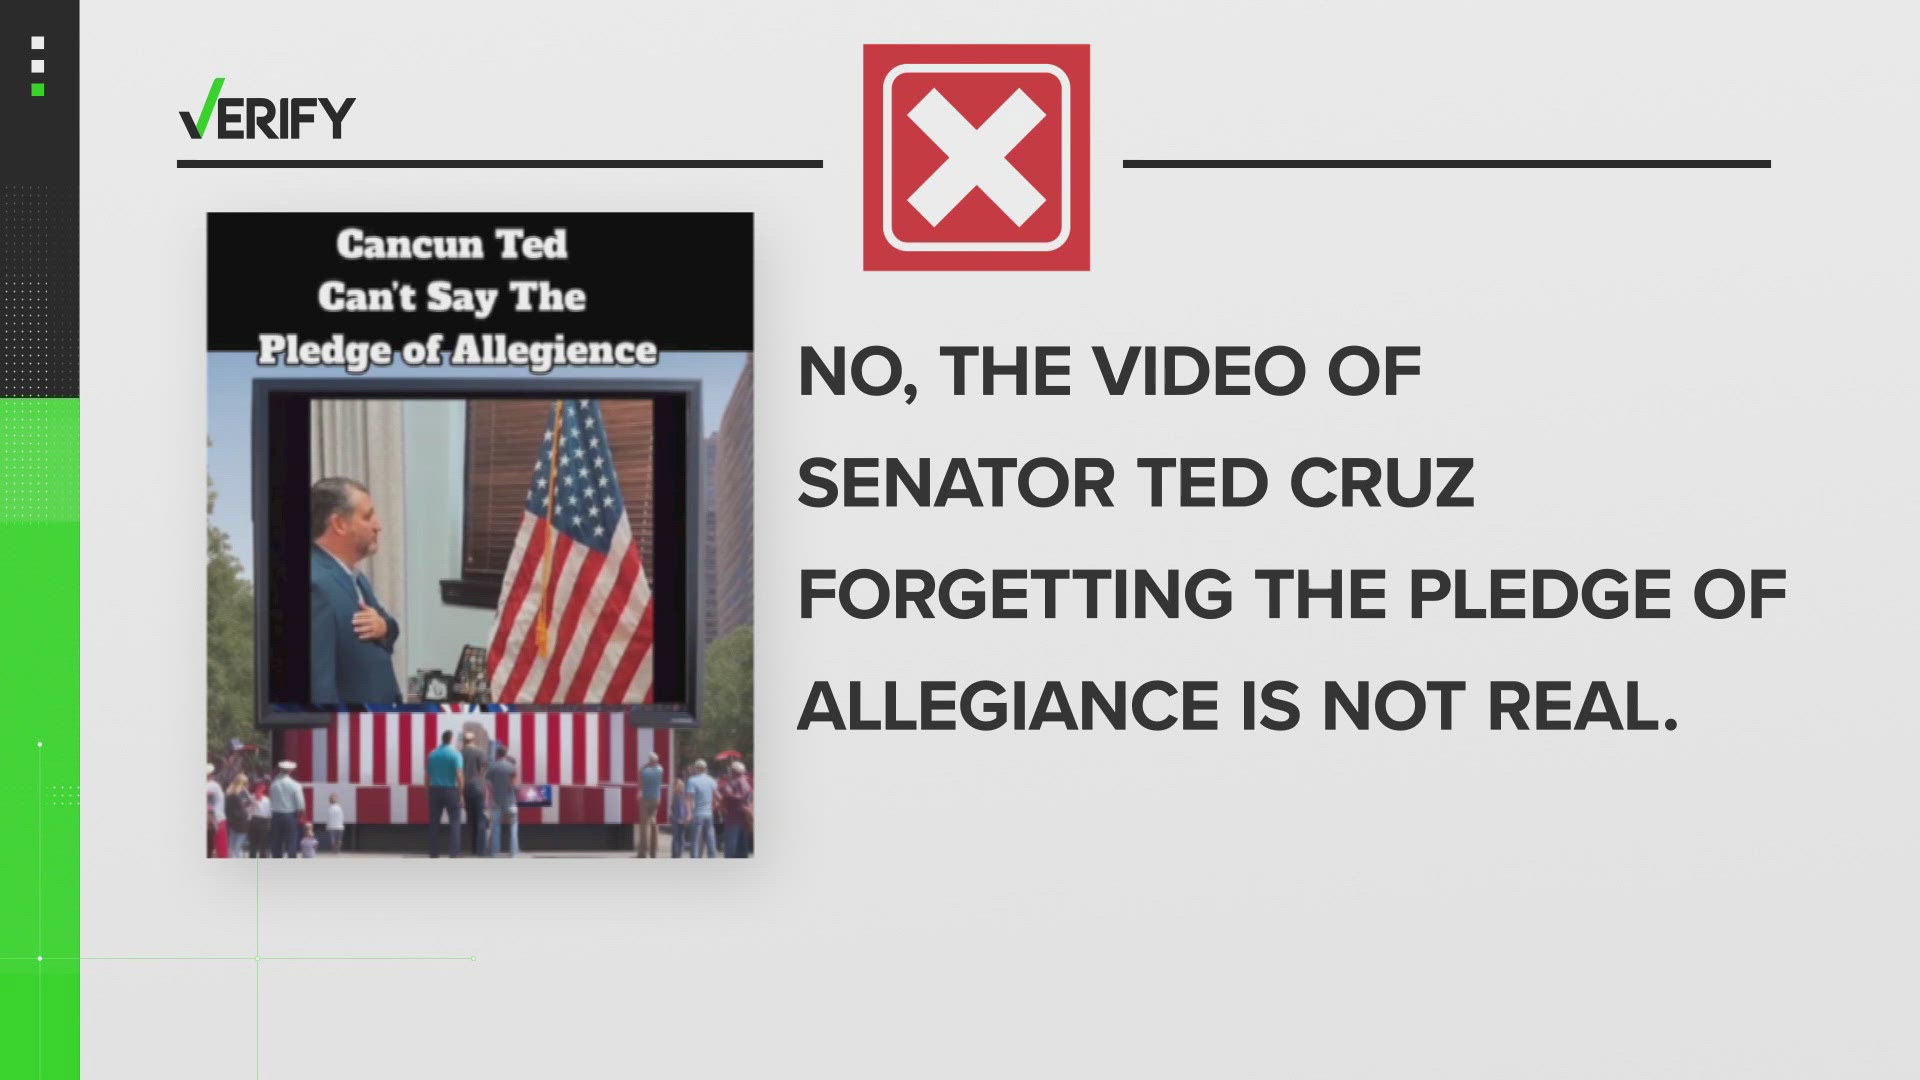 A viral video appearing to show Sen. Ted Cruz forgetting some of the words to the Pledge of Allegiance has been altered.